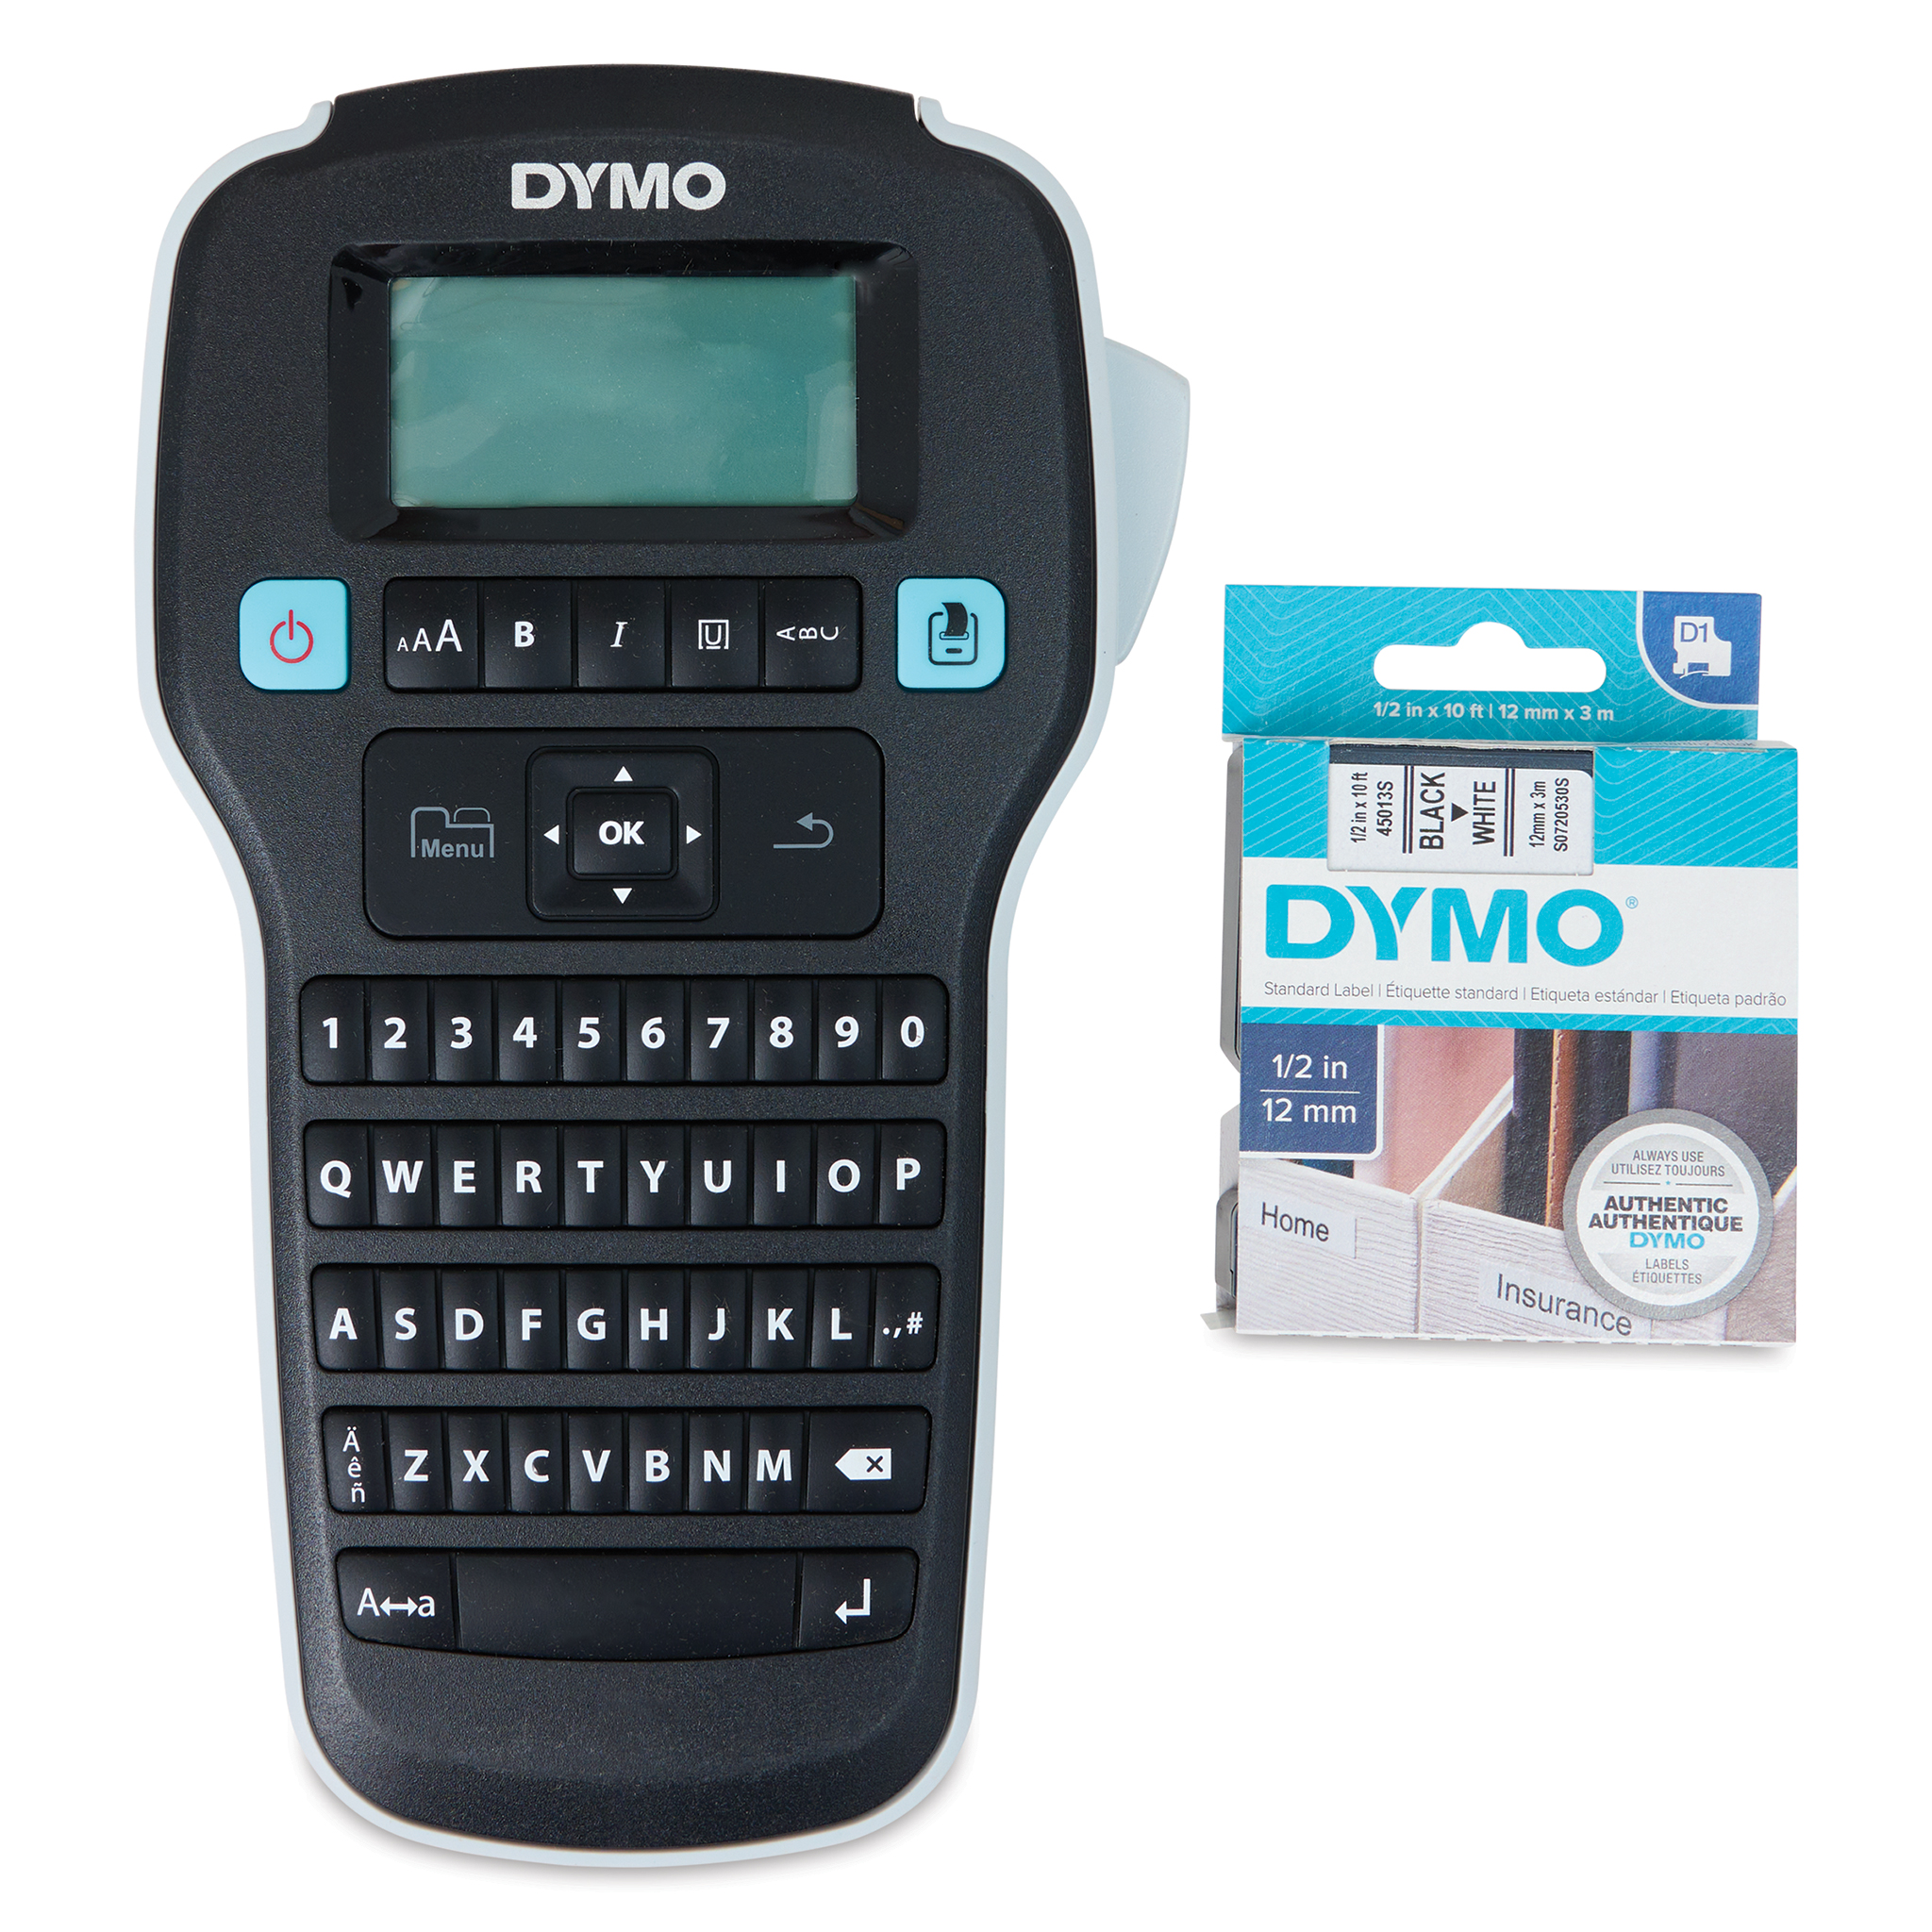 DYMO LabelManager 160 Hand Held Label Maker 